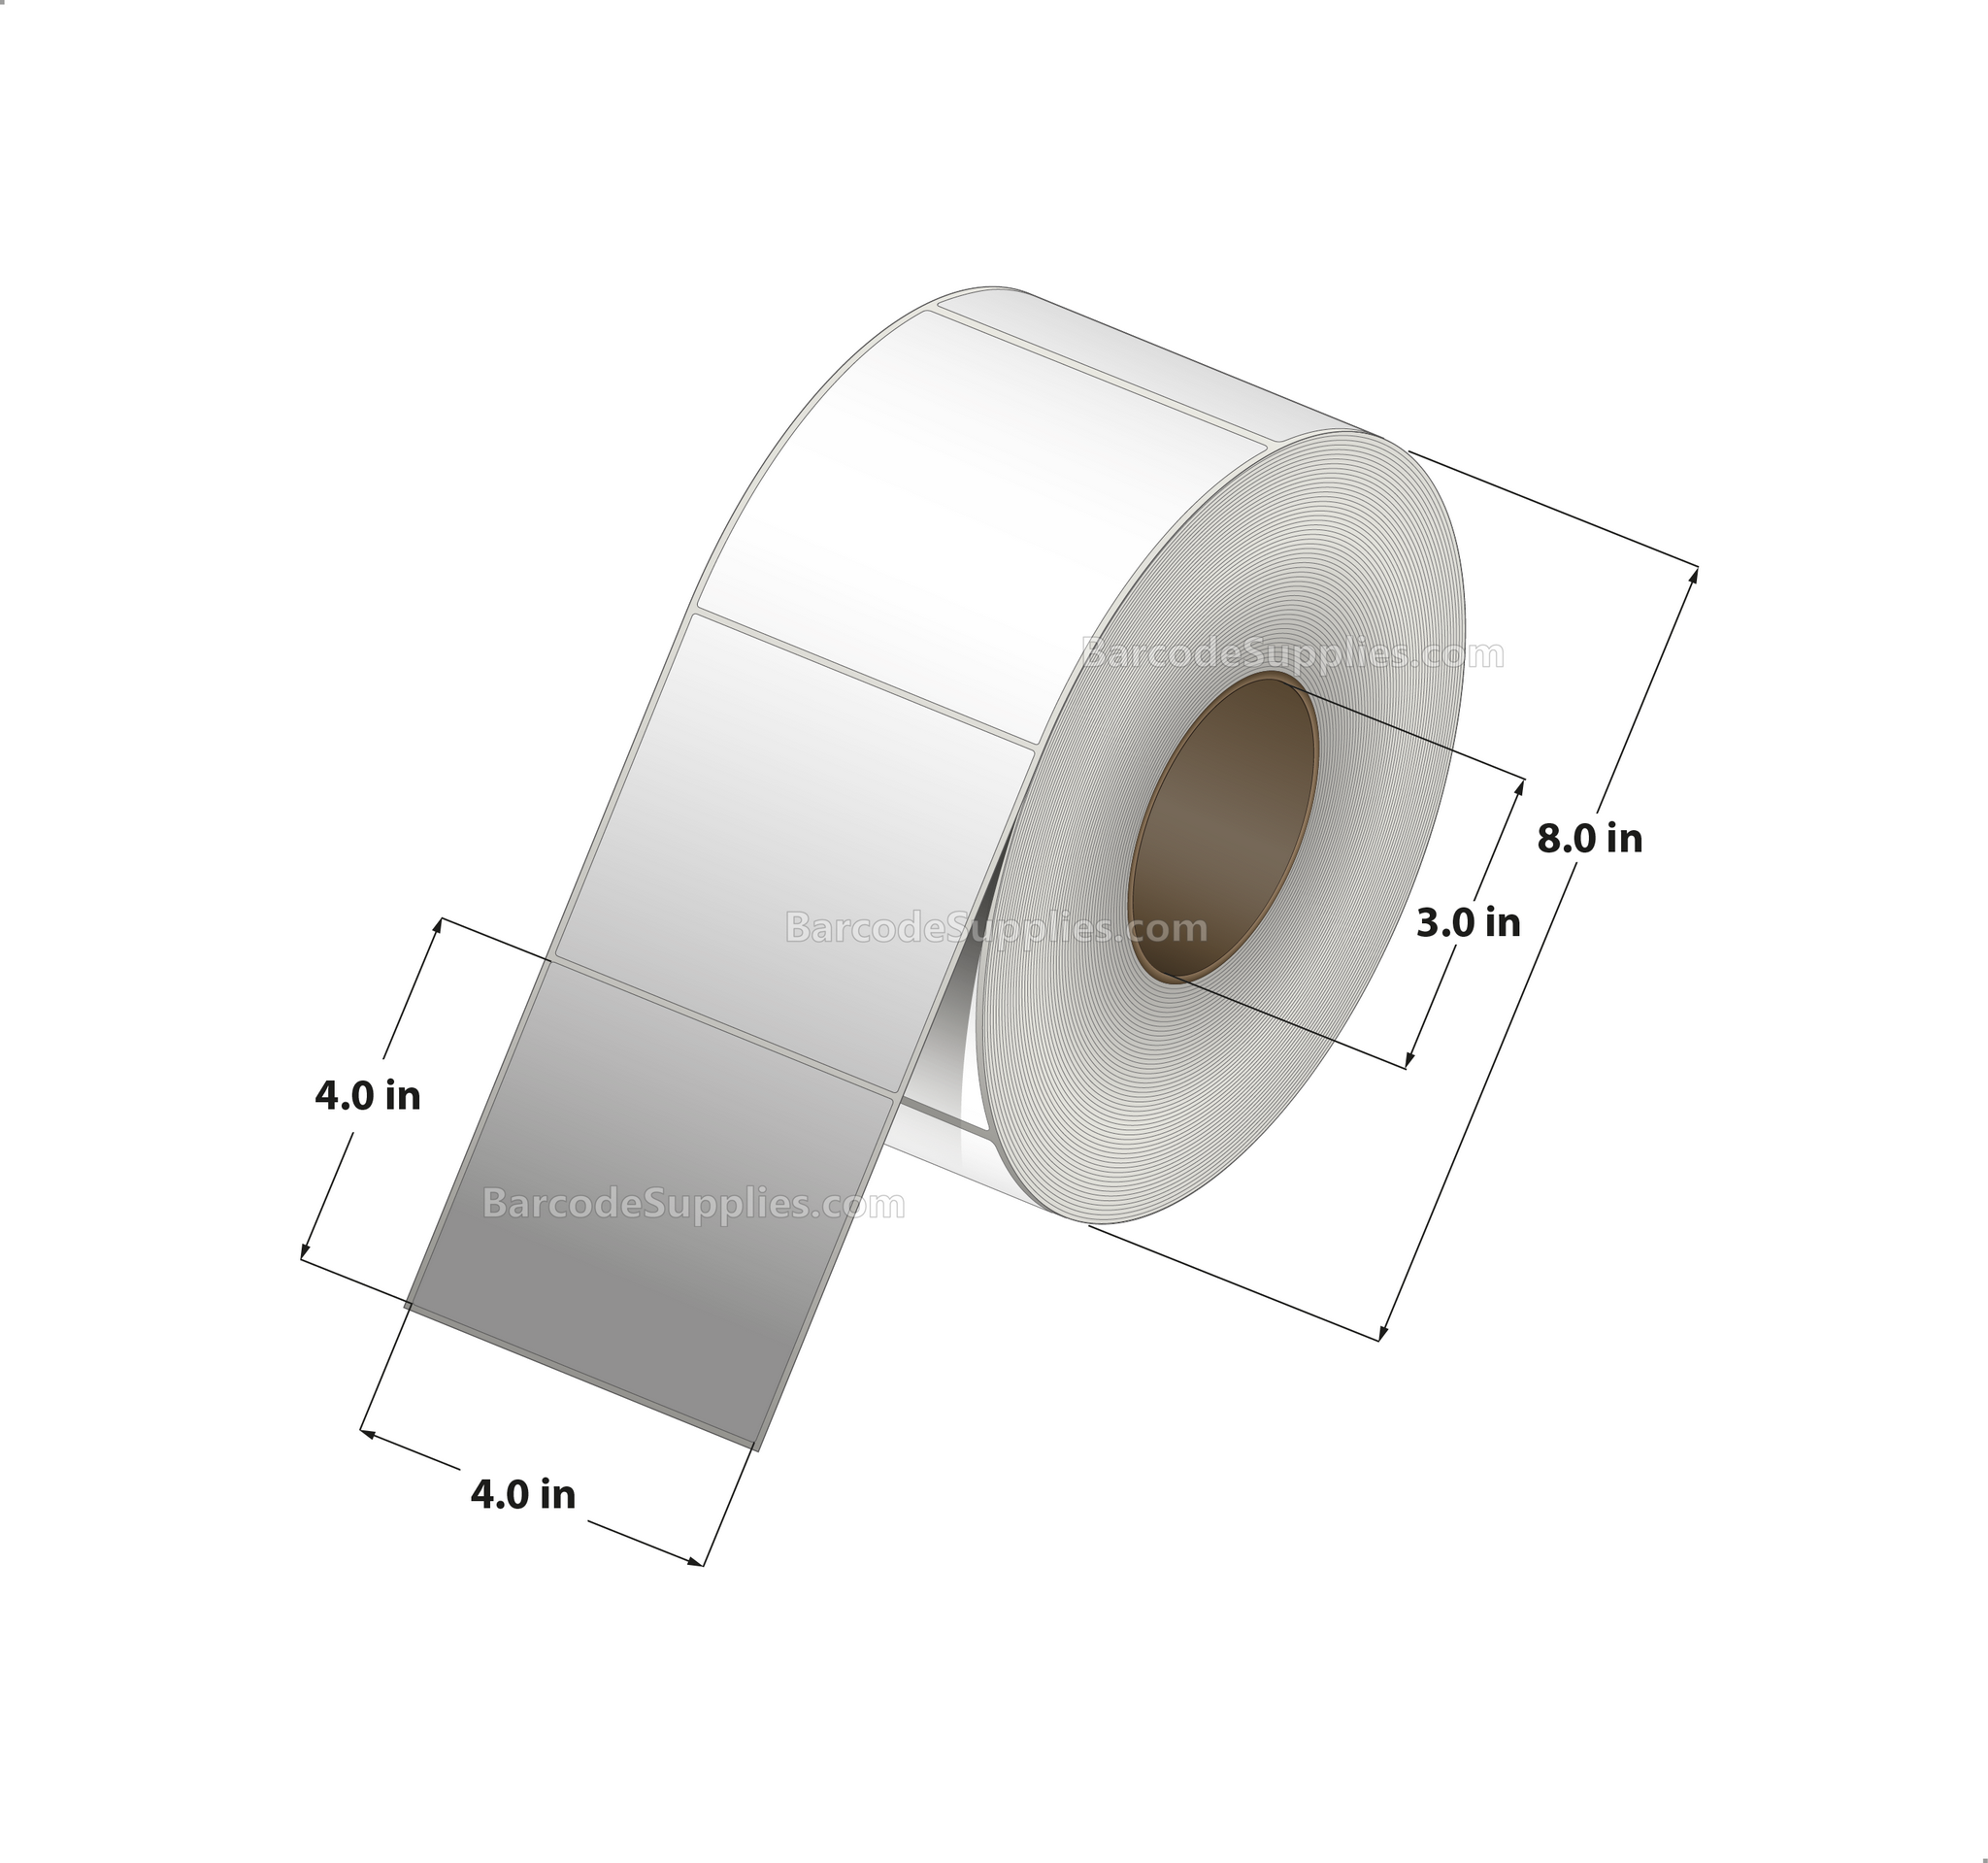 4 x 4 Thermal Transfer White Labels With Rubber Adhesive - No Perforation - 1500 Labels Per Roll - Carton Of 4 Rolls - 6000 Labels Total - MPN: CTT400400-3